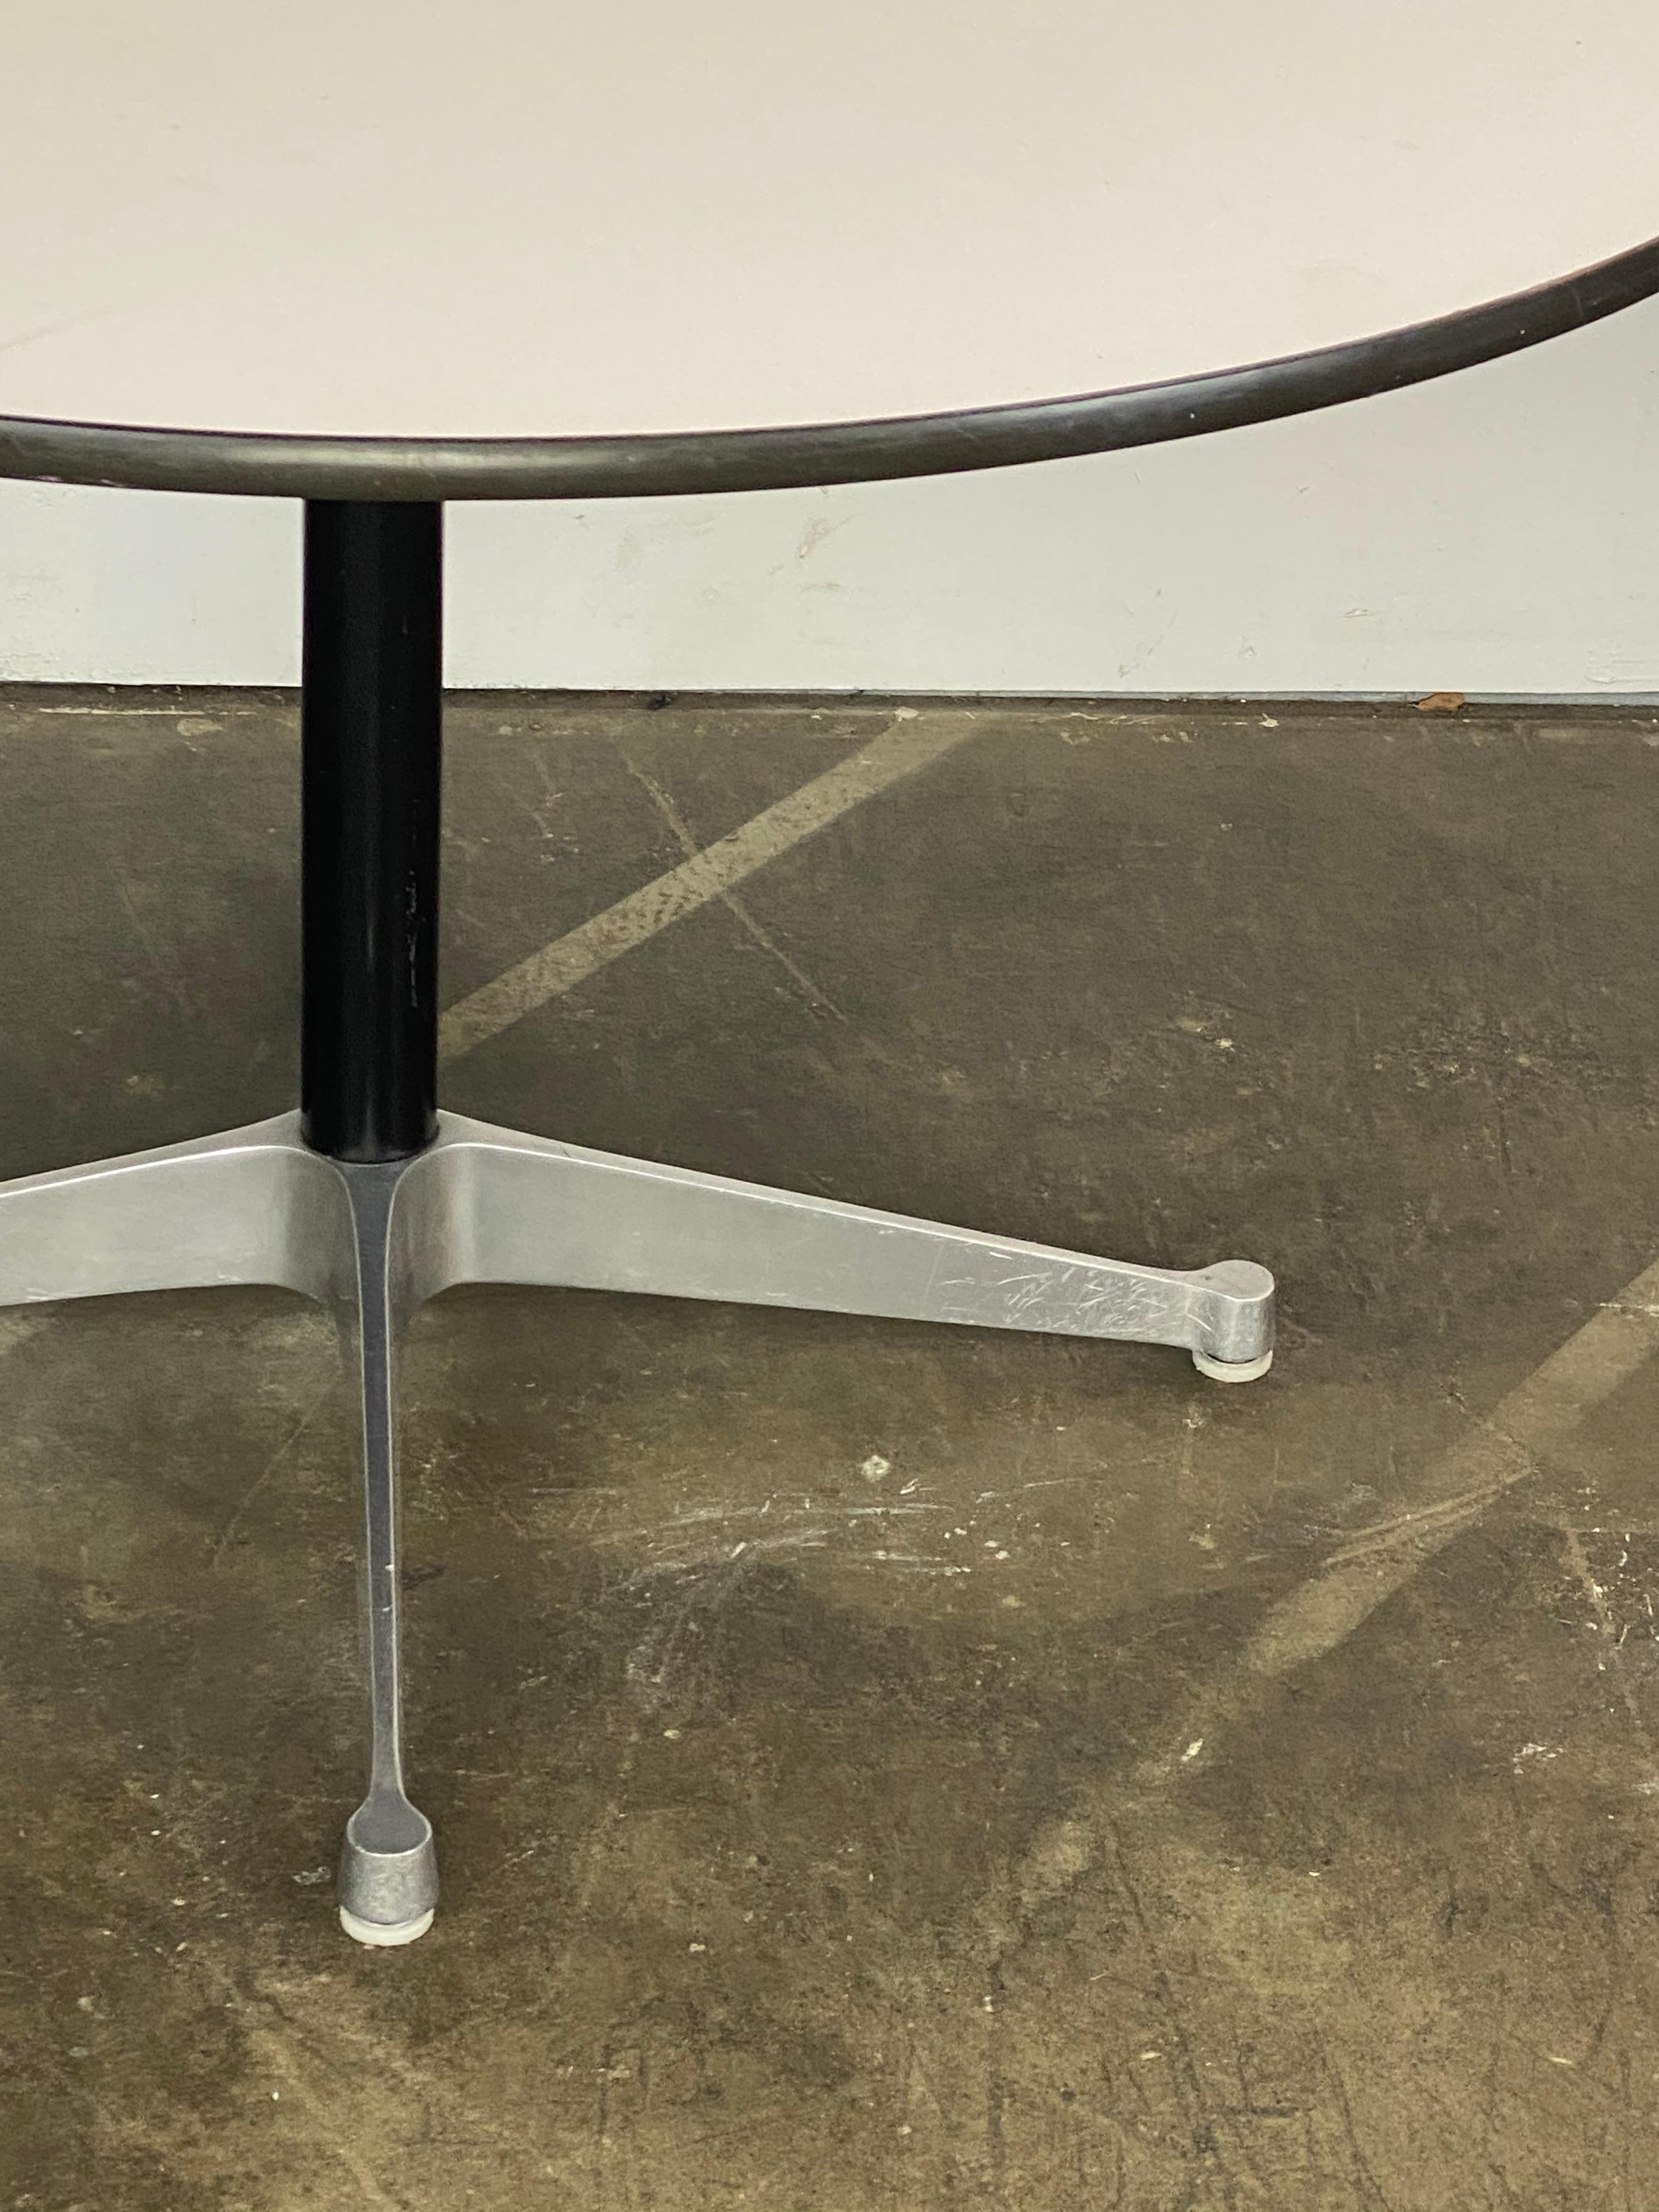 Herman Miller Eames classic dining table. 48 inches in diameter. Size accommodates up to 6 chairs. White laminate top in good condition a top Eames aluminum group contract base.